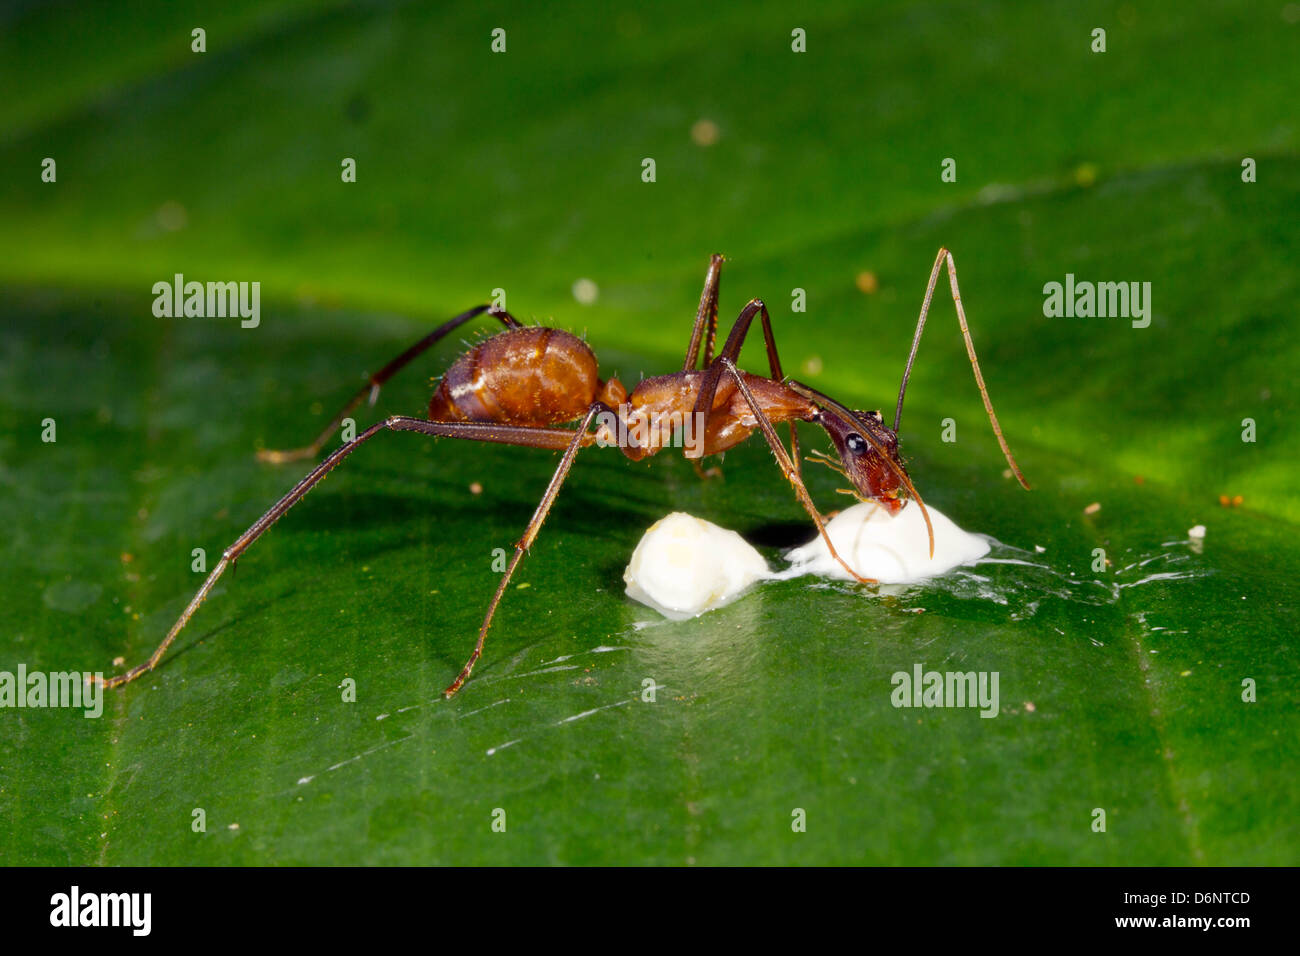 Large slender ant feeding on a bird dropping on a leaf in the rainforest understory, Ecuador Stock Photo